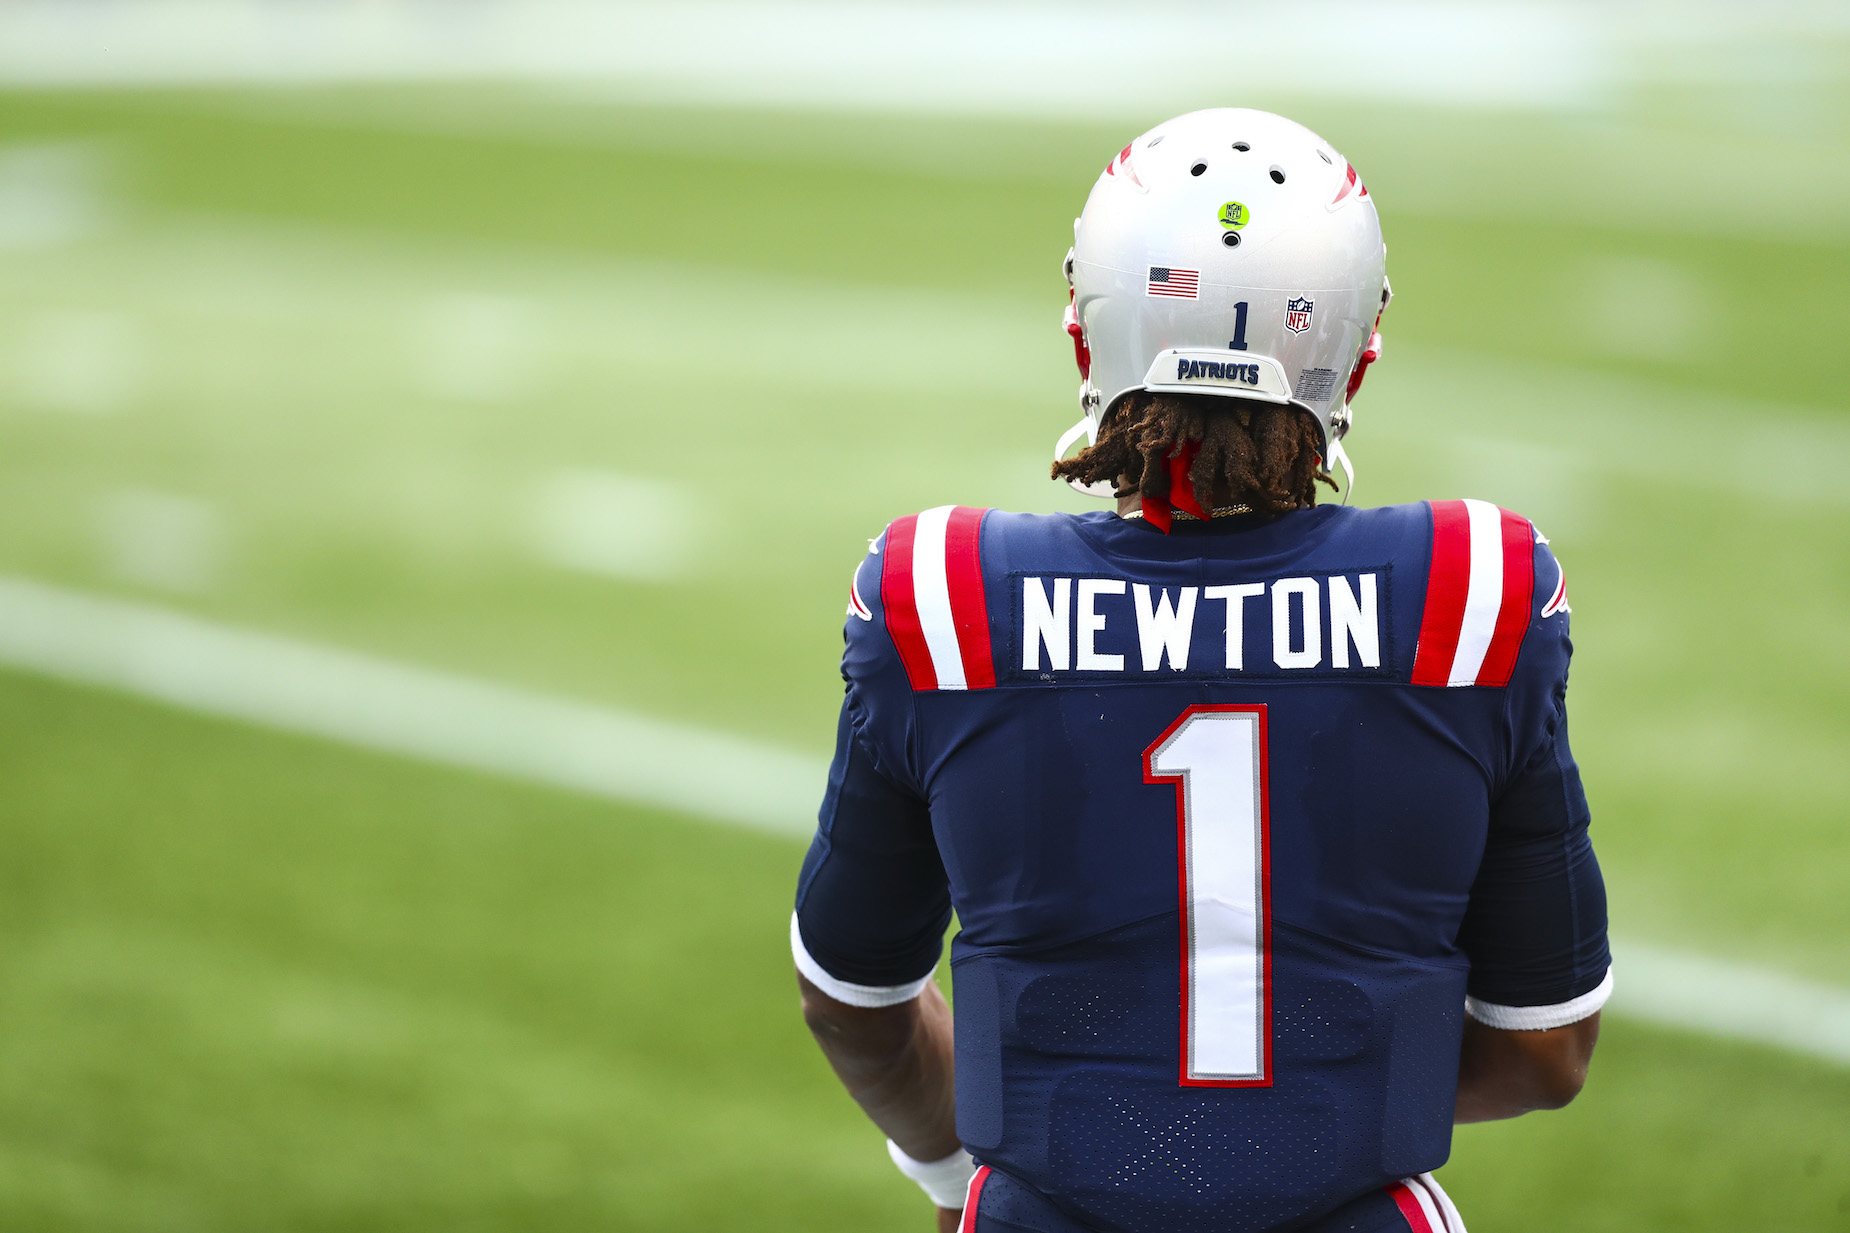 How long will COVID-19 keep Cam Newton from playing with the New England Patriots?